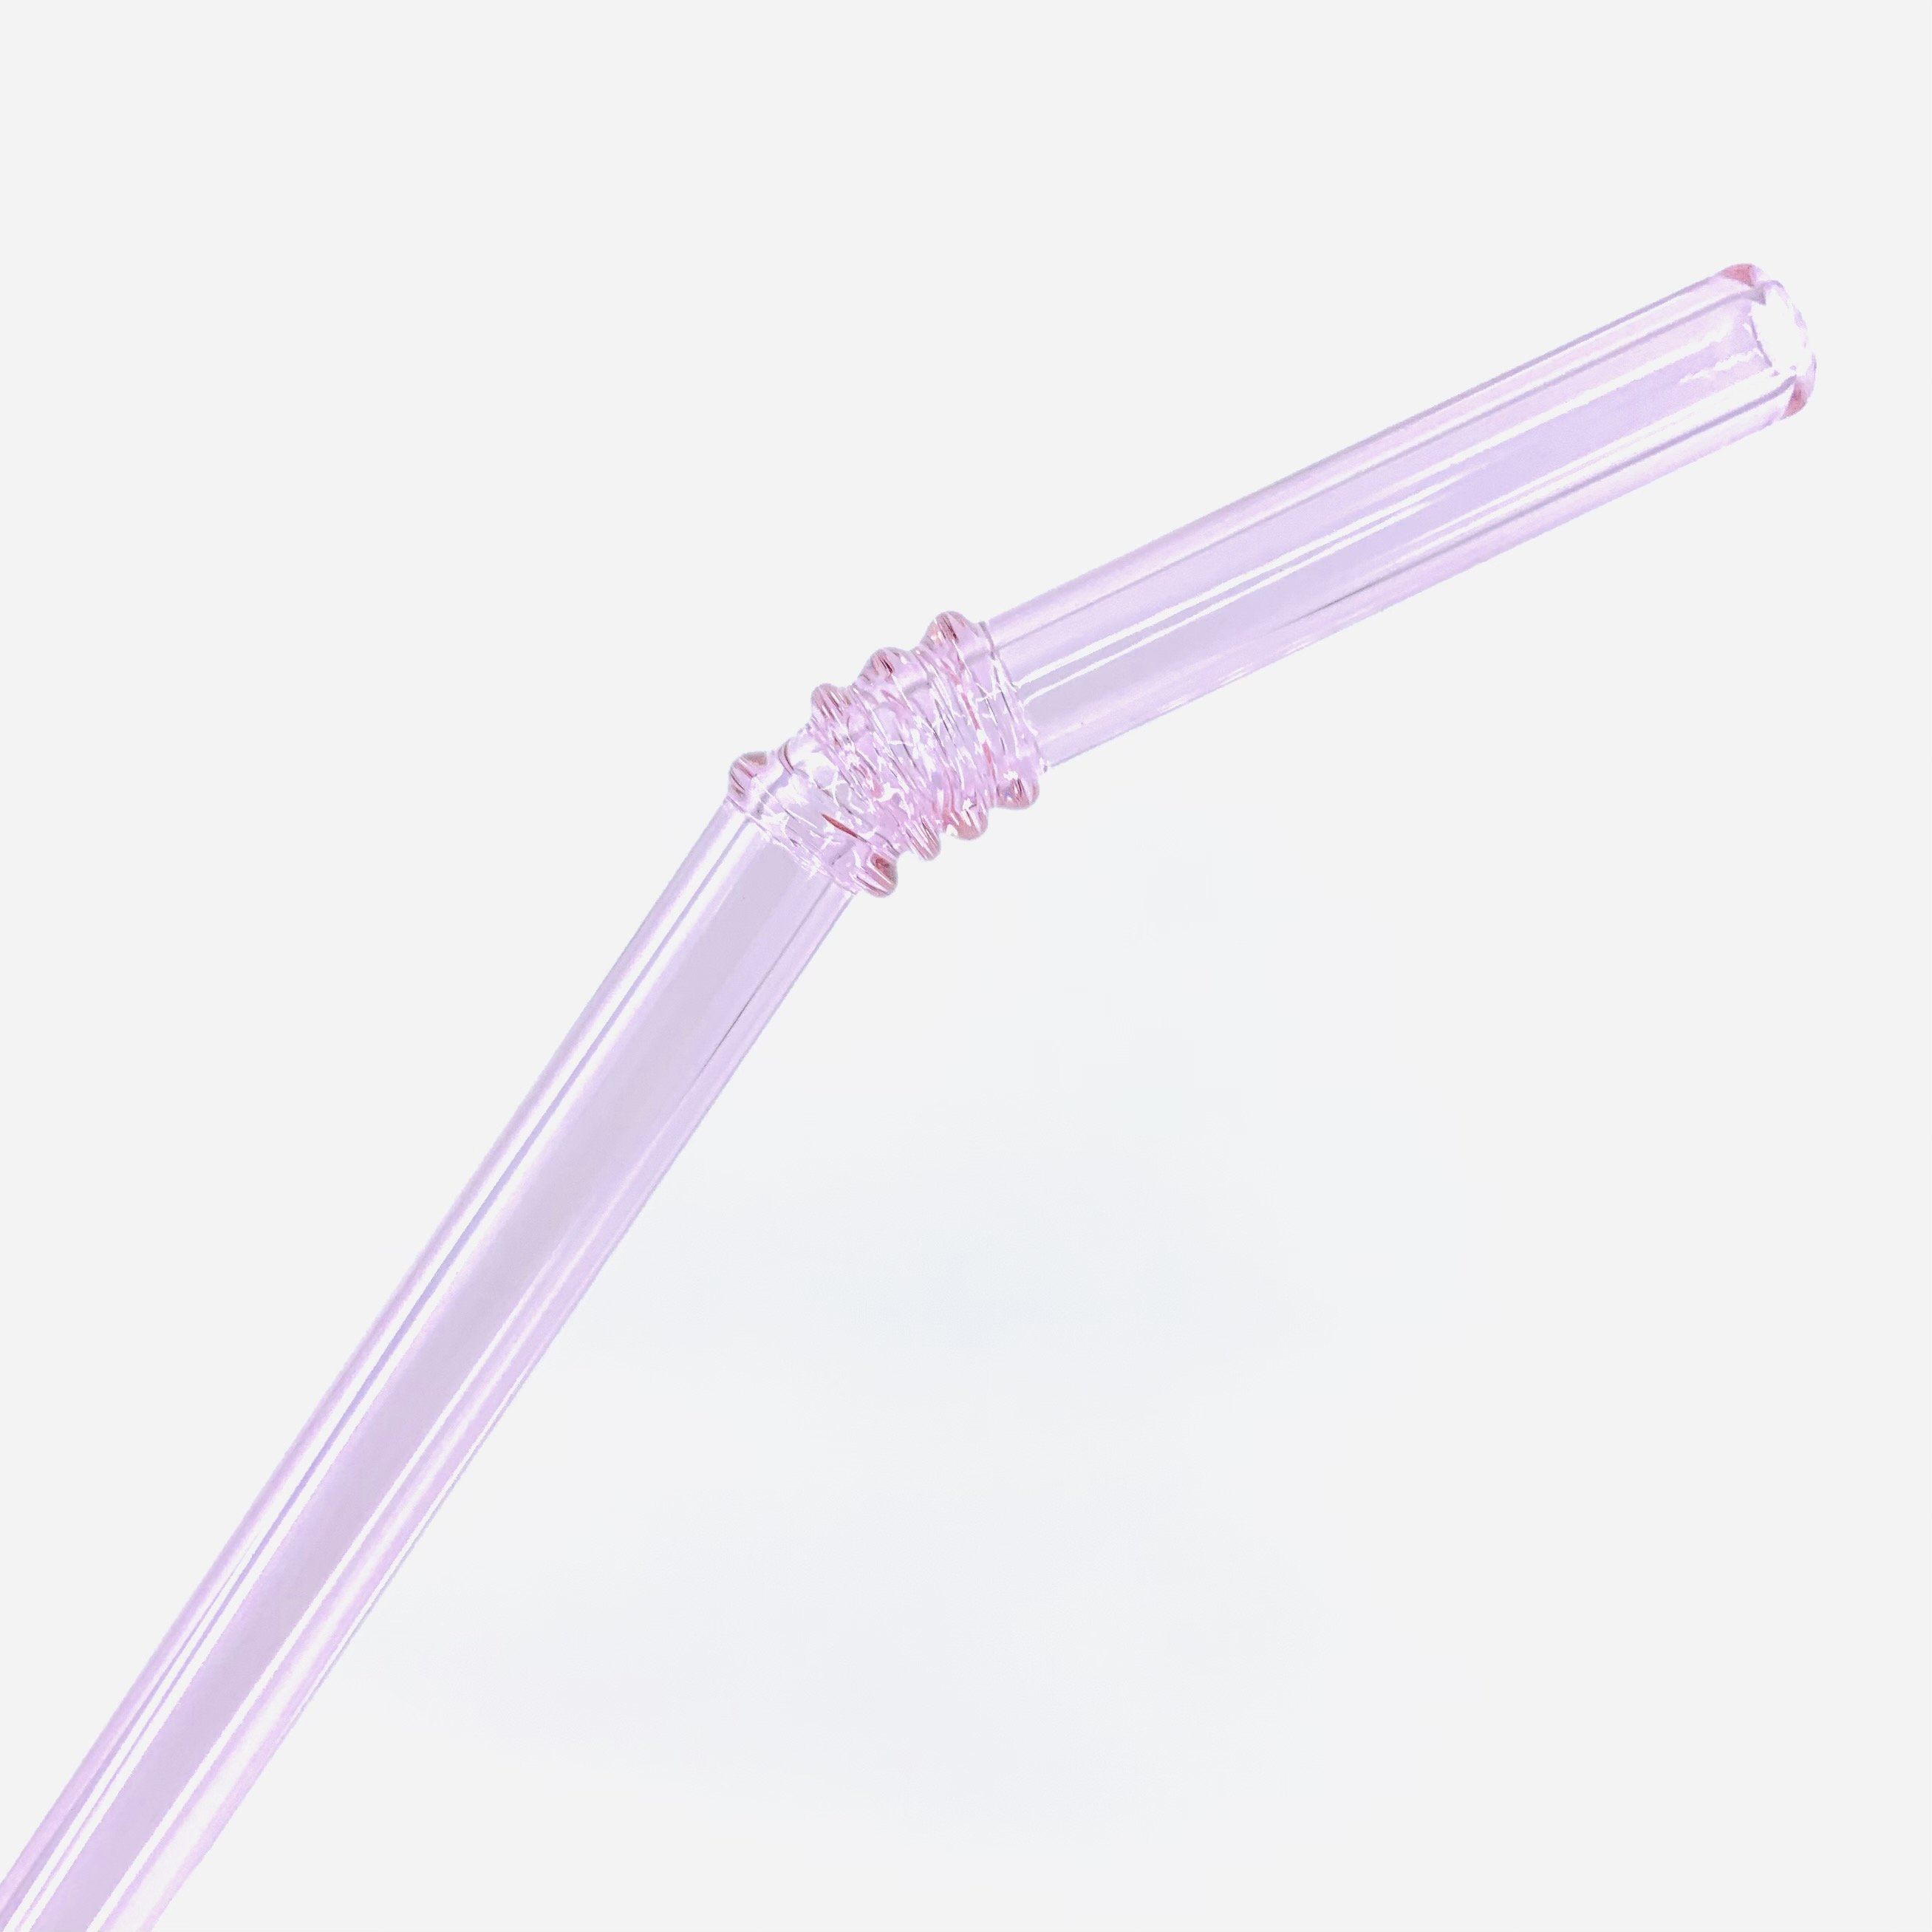 Colored Reusable Glass Straws - The Most Irresistible Shop in Hilo